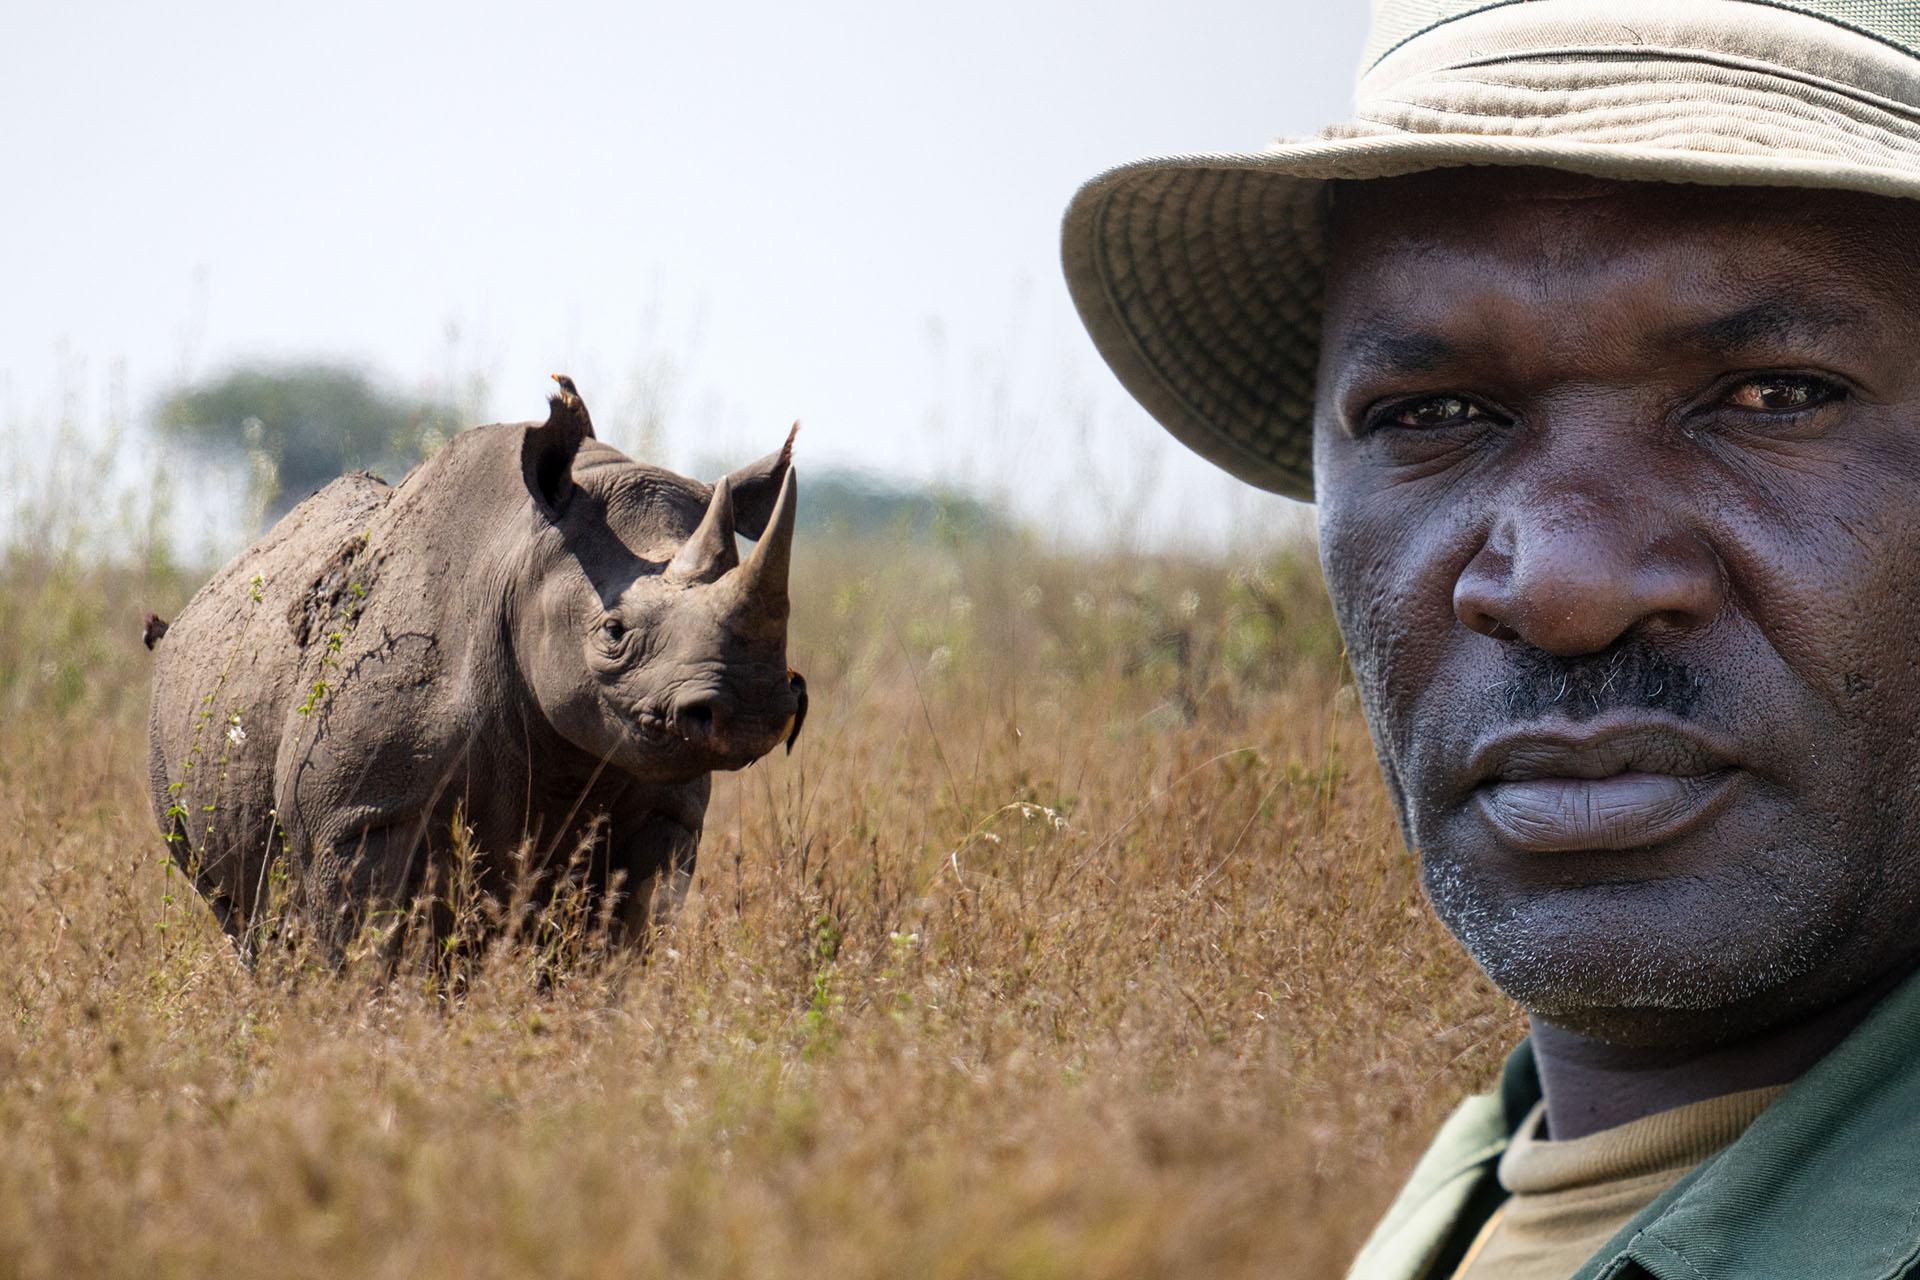 Today there are over fifty black rhinos breeding in the wild